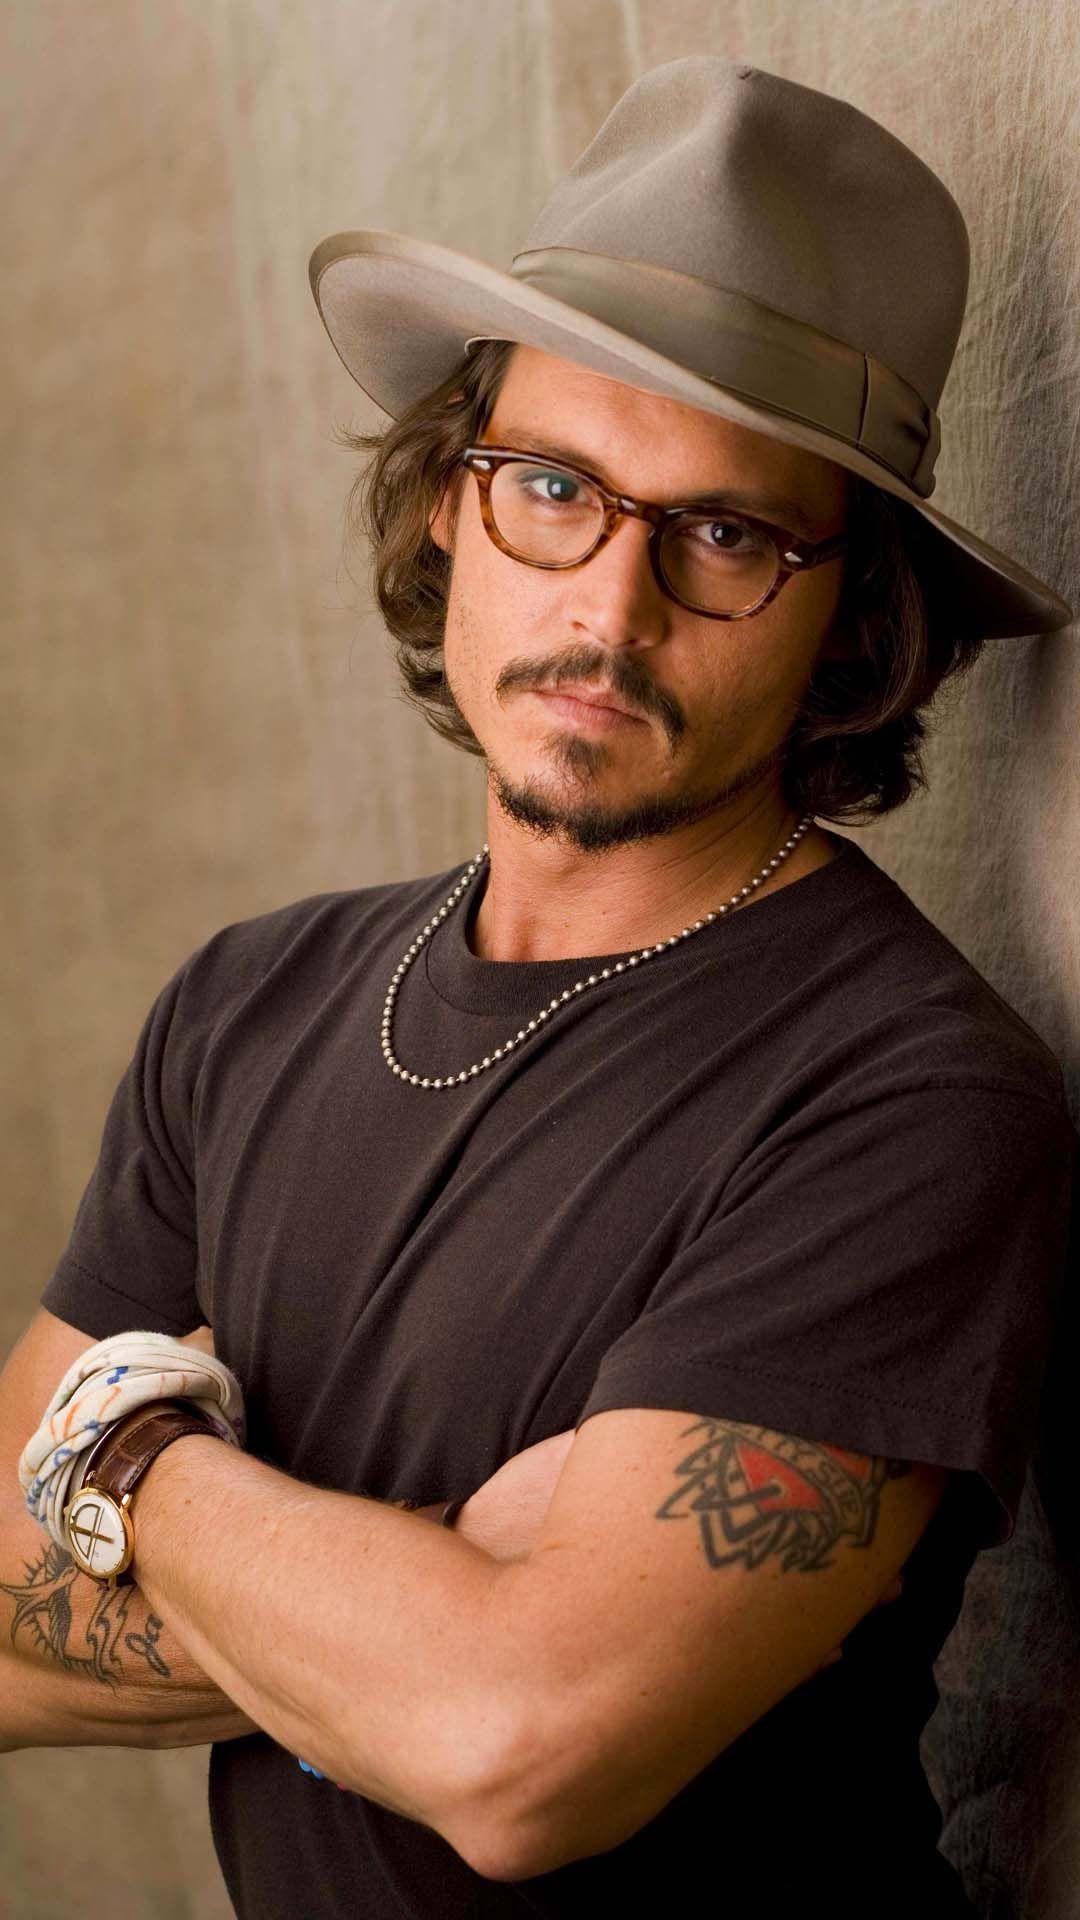 Johnny Depp htc one wallpaper, free and easy to download